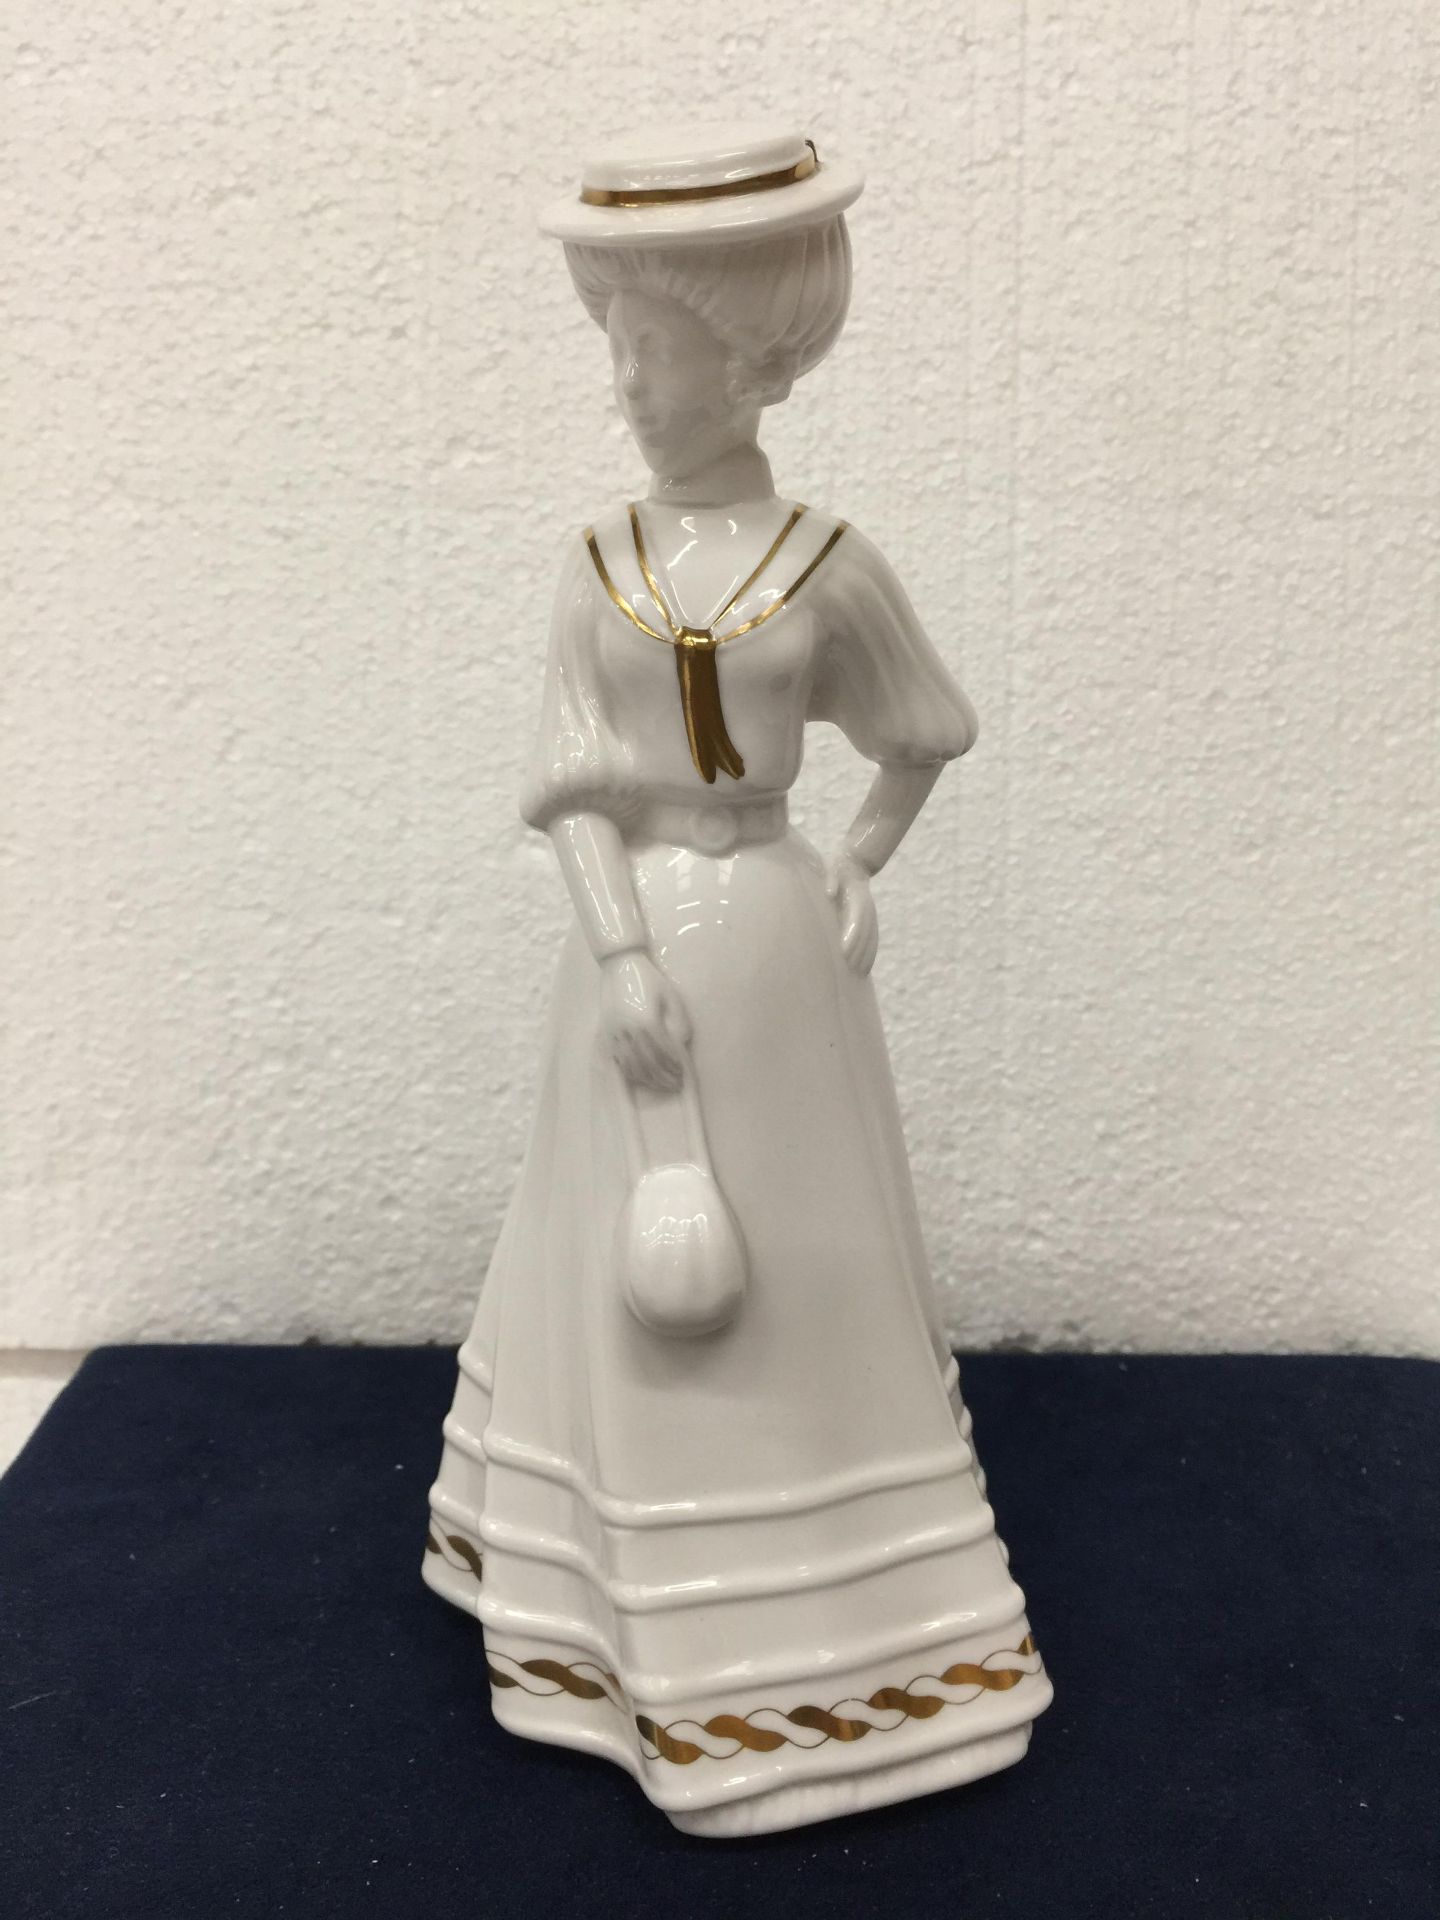 A SPODE FIGURINE "LILY" BY PAULINE SHONE IN GLOSS - 24CM (H)